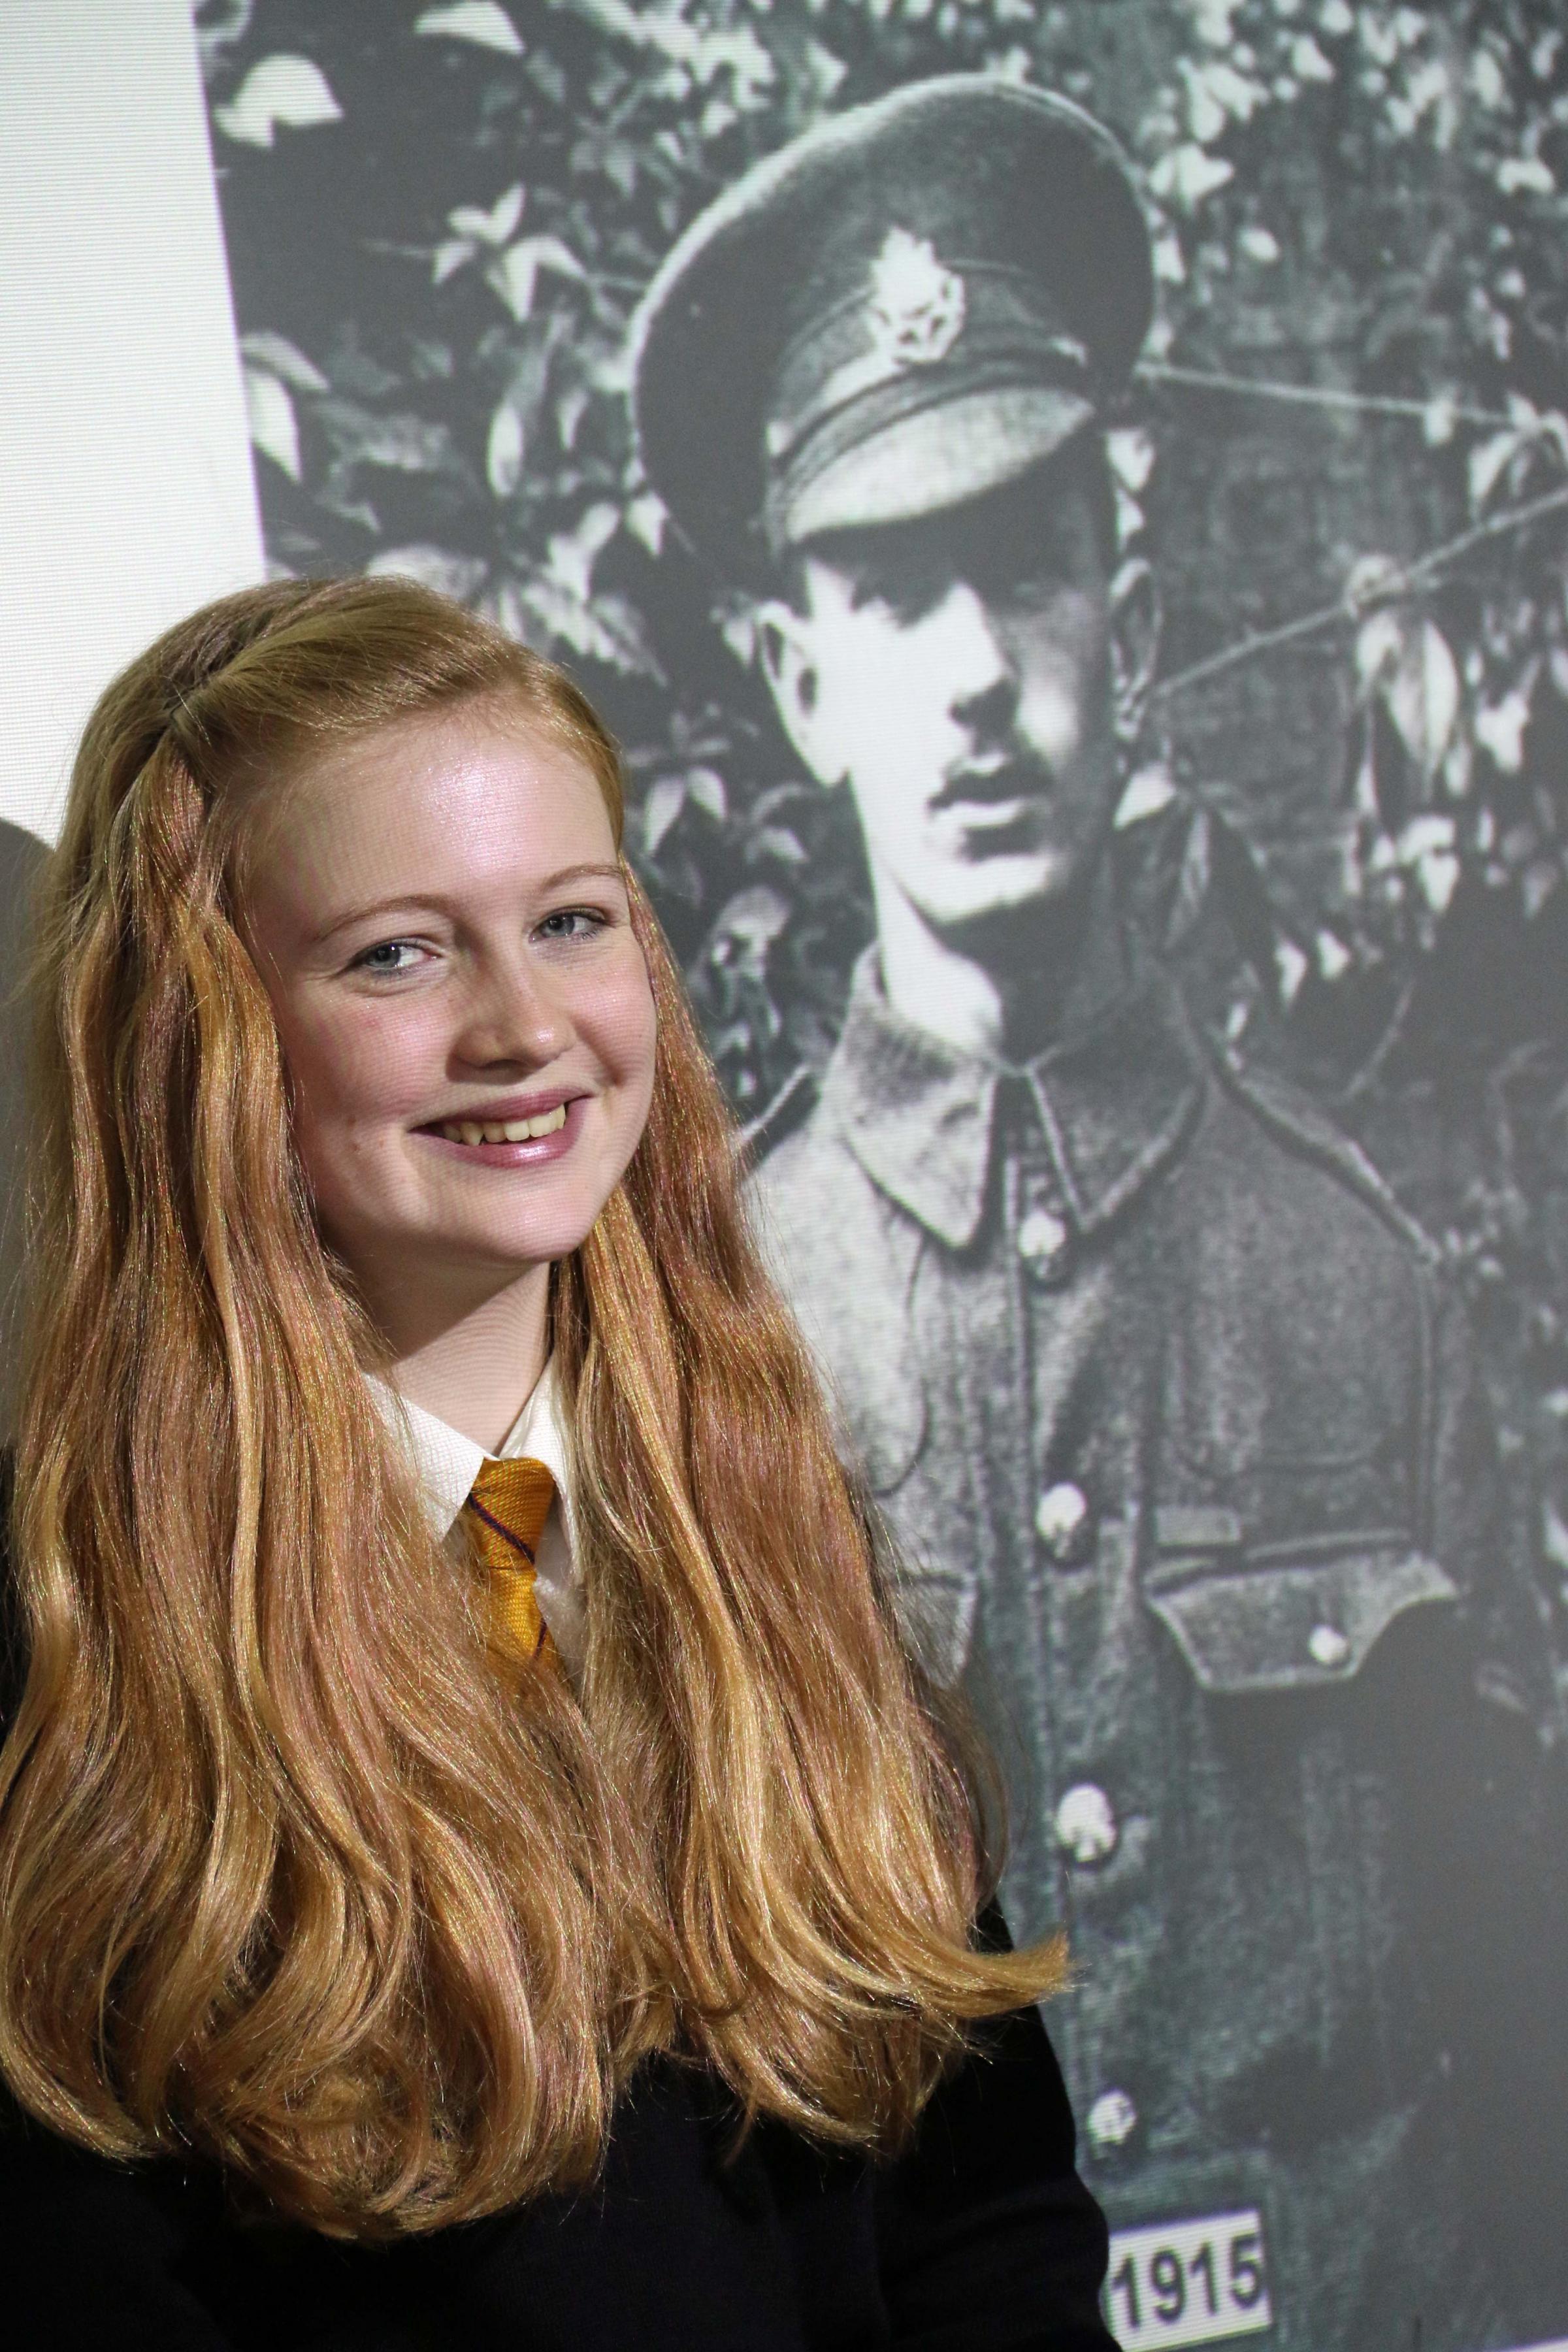 Homework of schoolgirl from Hunton, Richmond, reveals a VC hero in the family